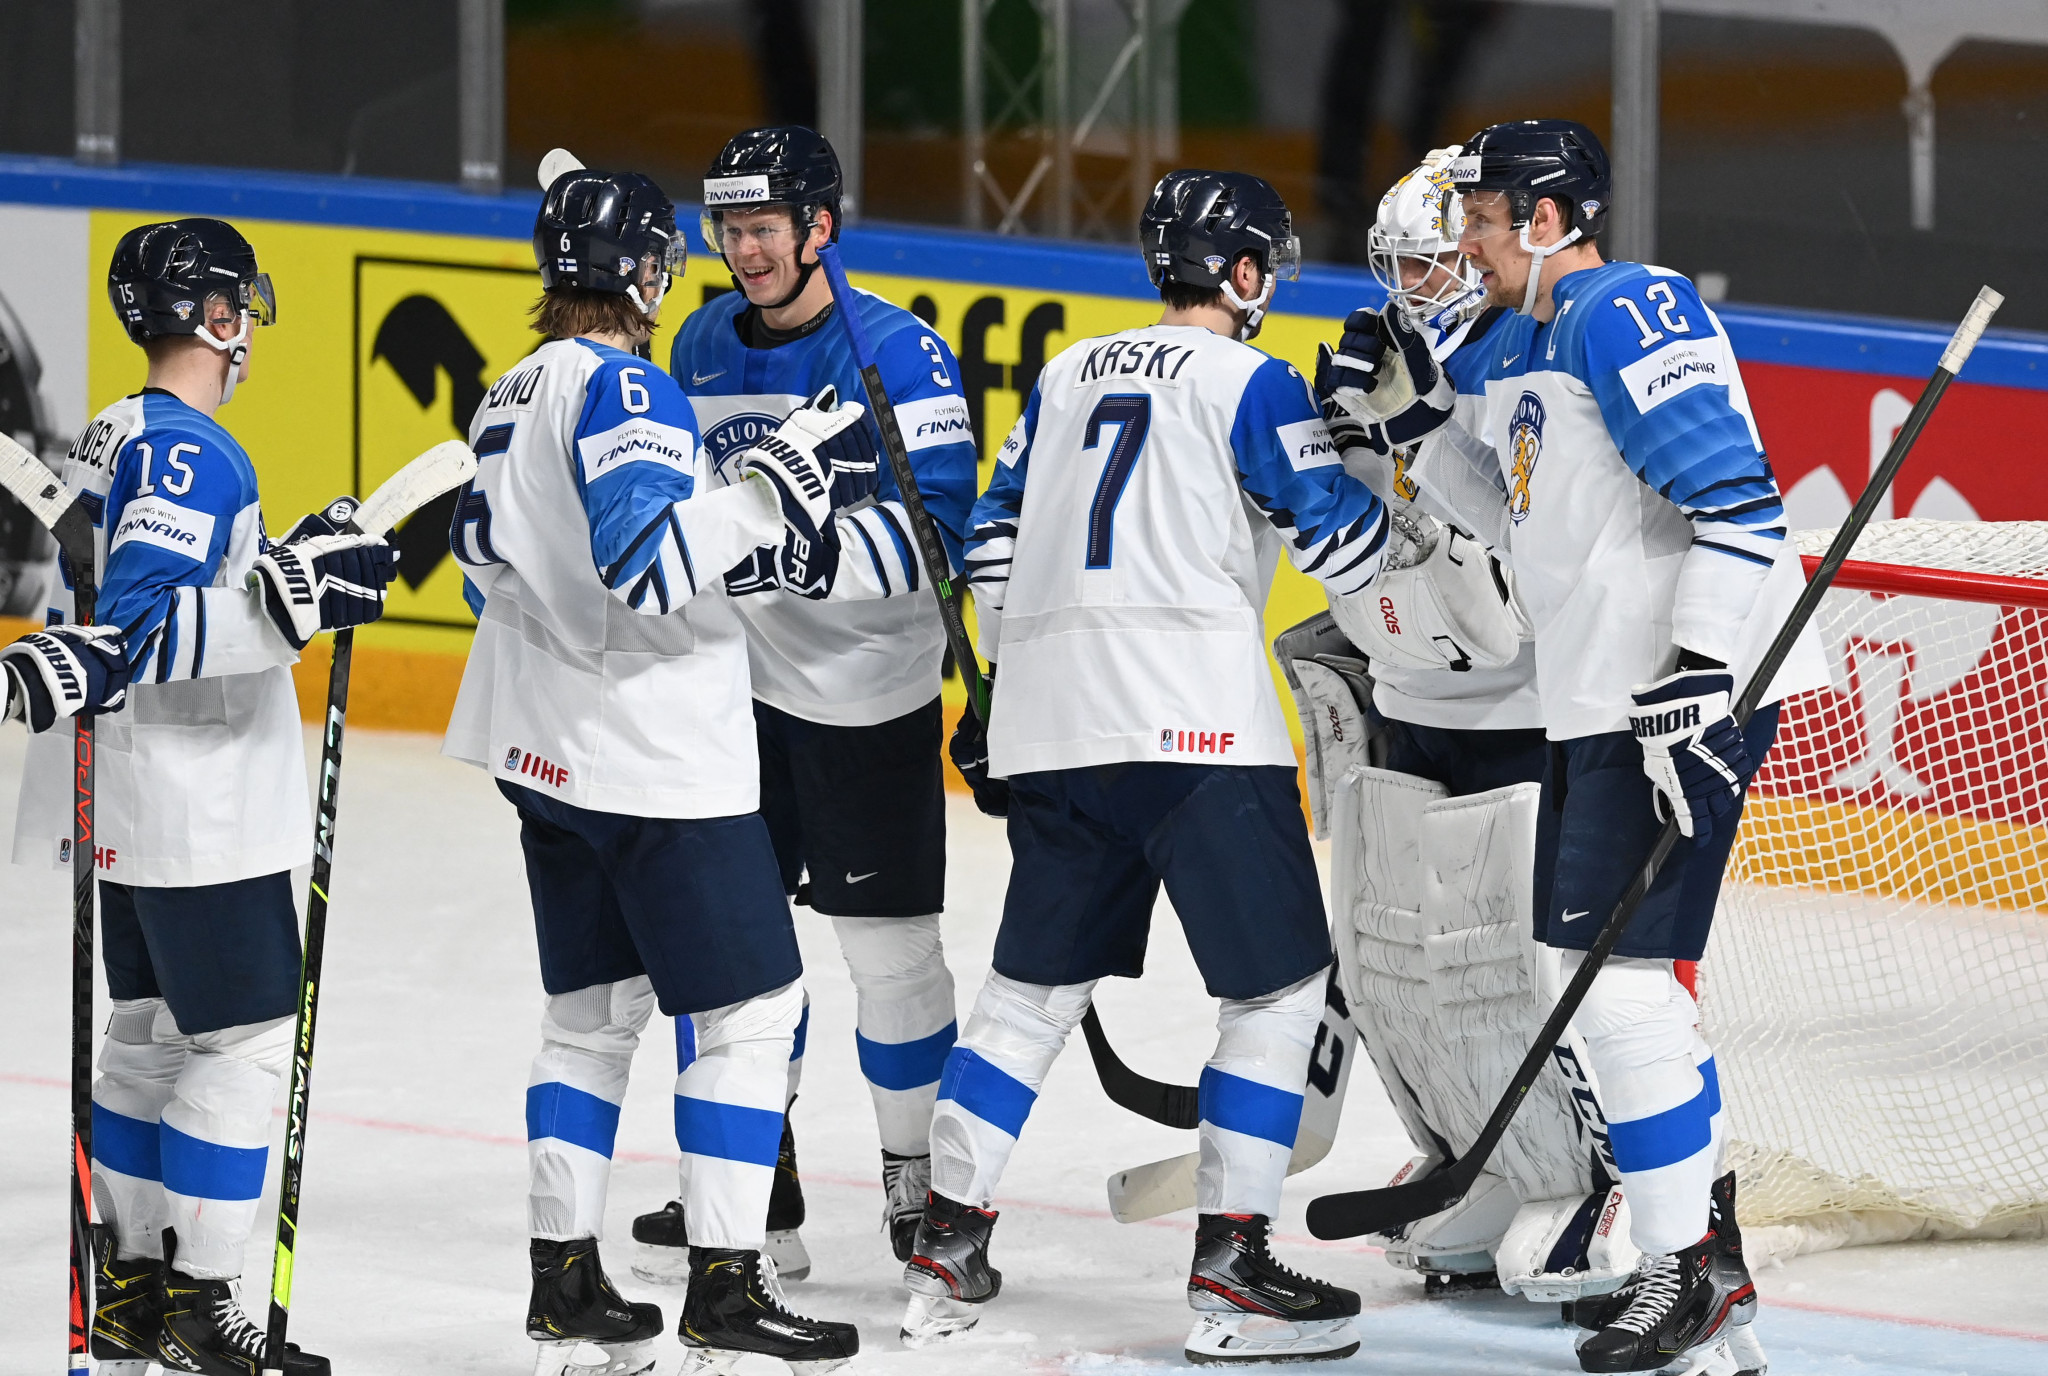 Defending champions Finland top IIHF Men's World Championship group after overtime win